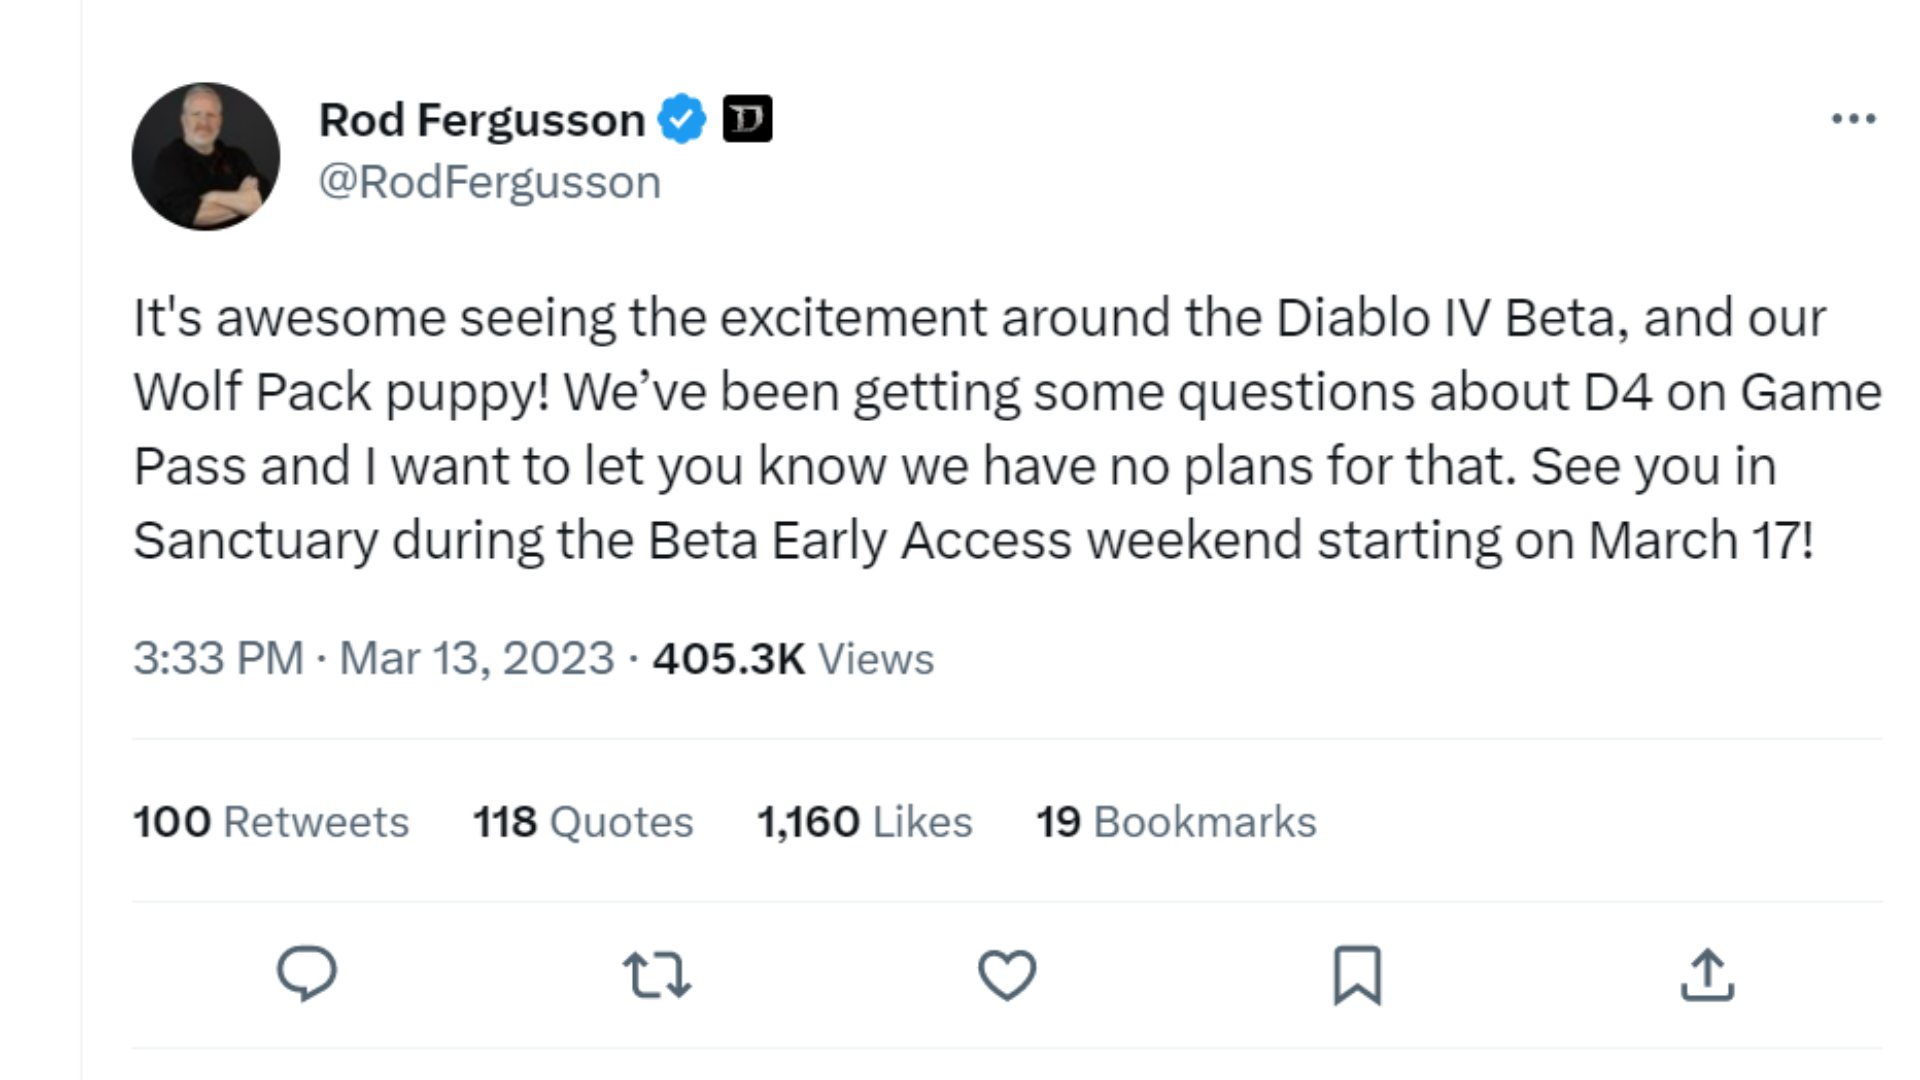 Rod Fergusson confirming that there are no plans for Diablo 4 on Game Pass.